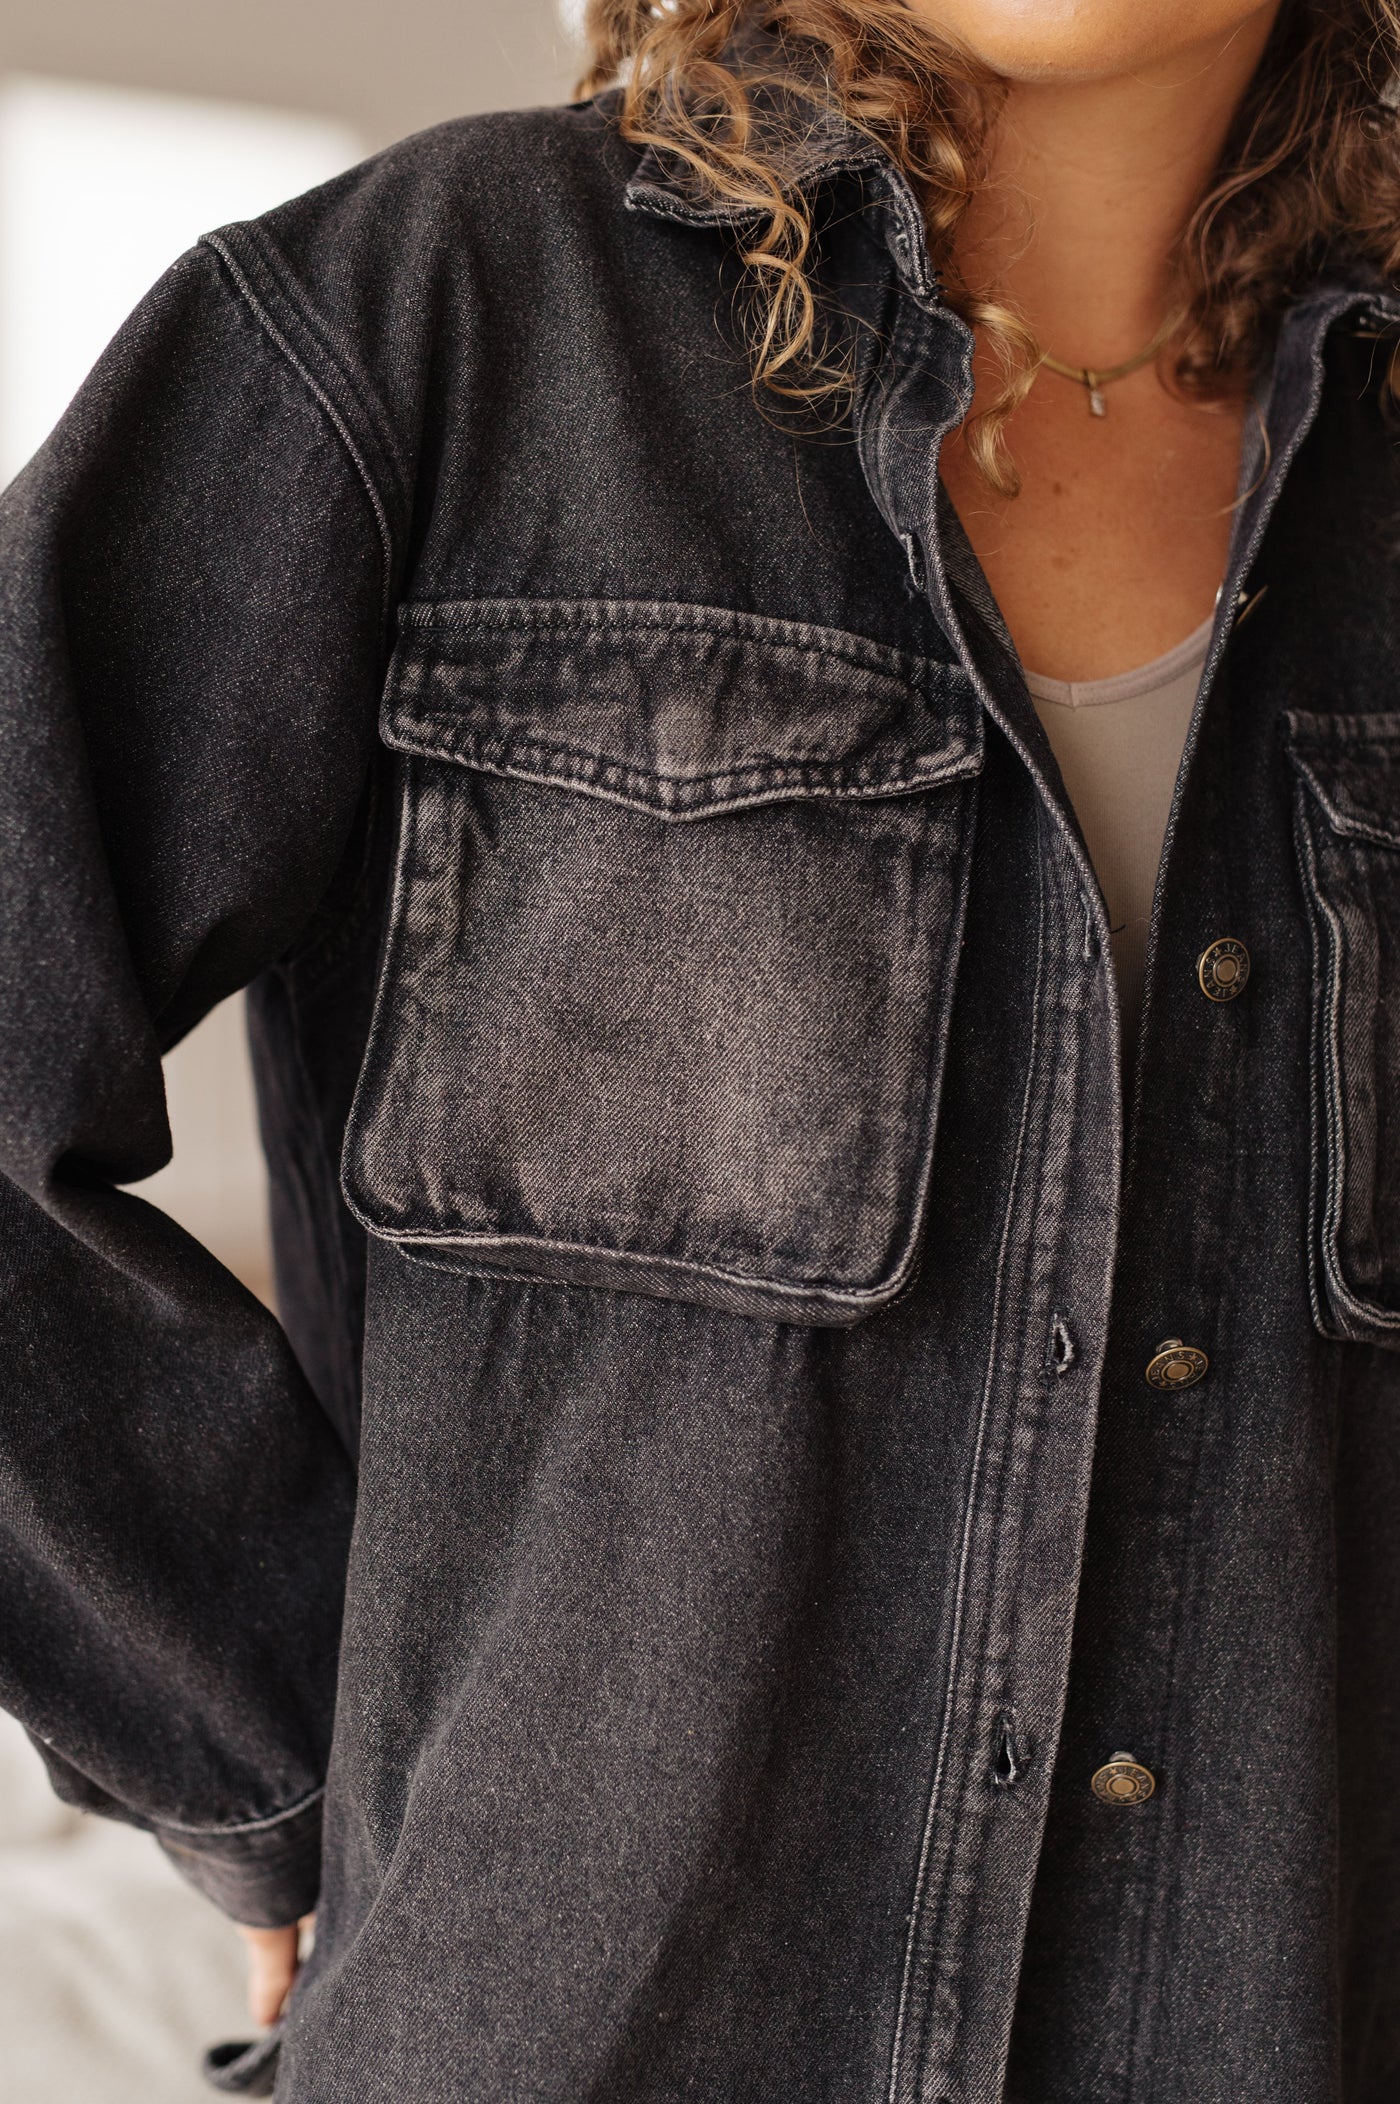 This By The Fireside Shacket is the perfect layering piece for cool days